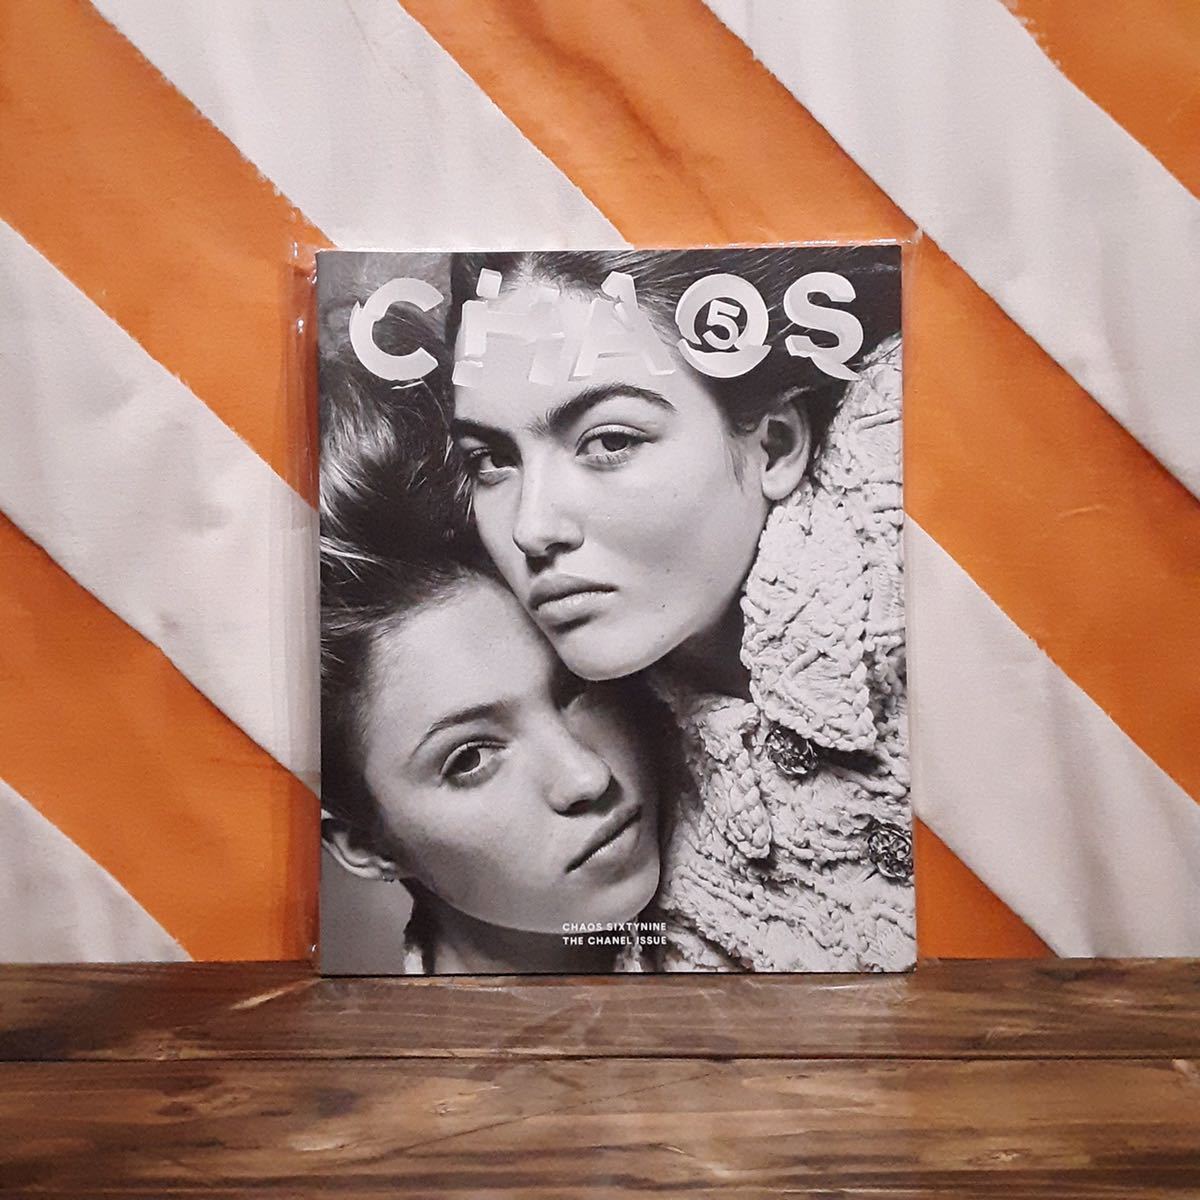 CHAOS SIXTYNINE 5TH EDITION x CHANEL issue poster BOOK カオス シックスティナイン 5周年 限定企画 洋書 シャネル アーカイブ 洋雑誌 03